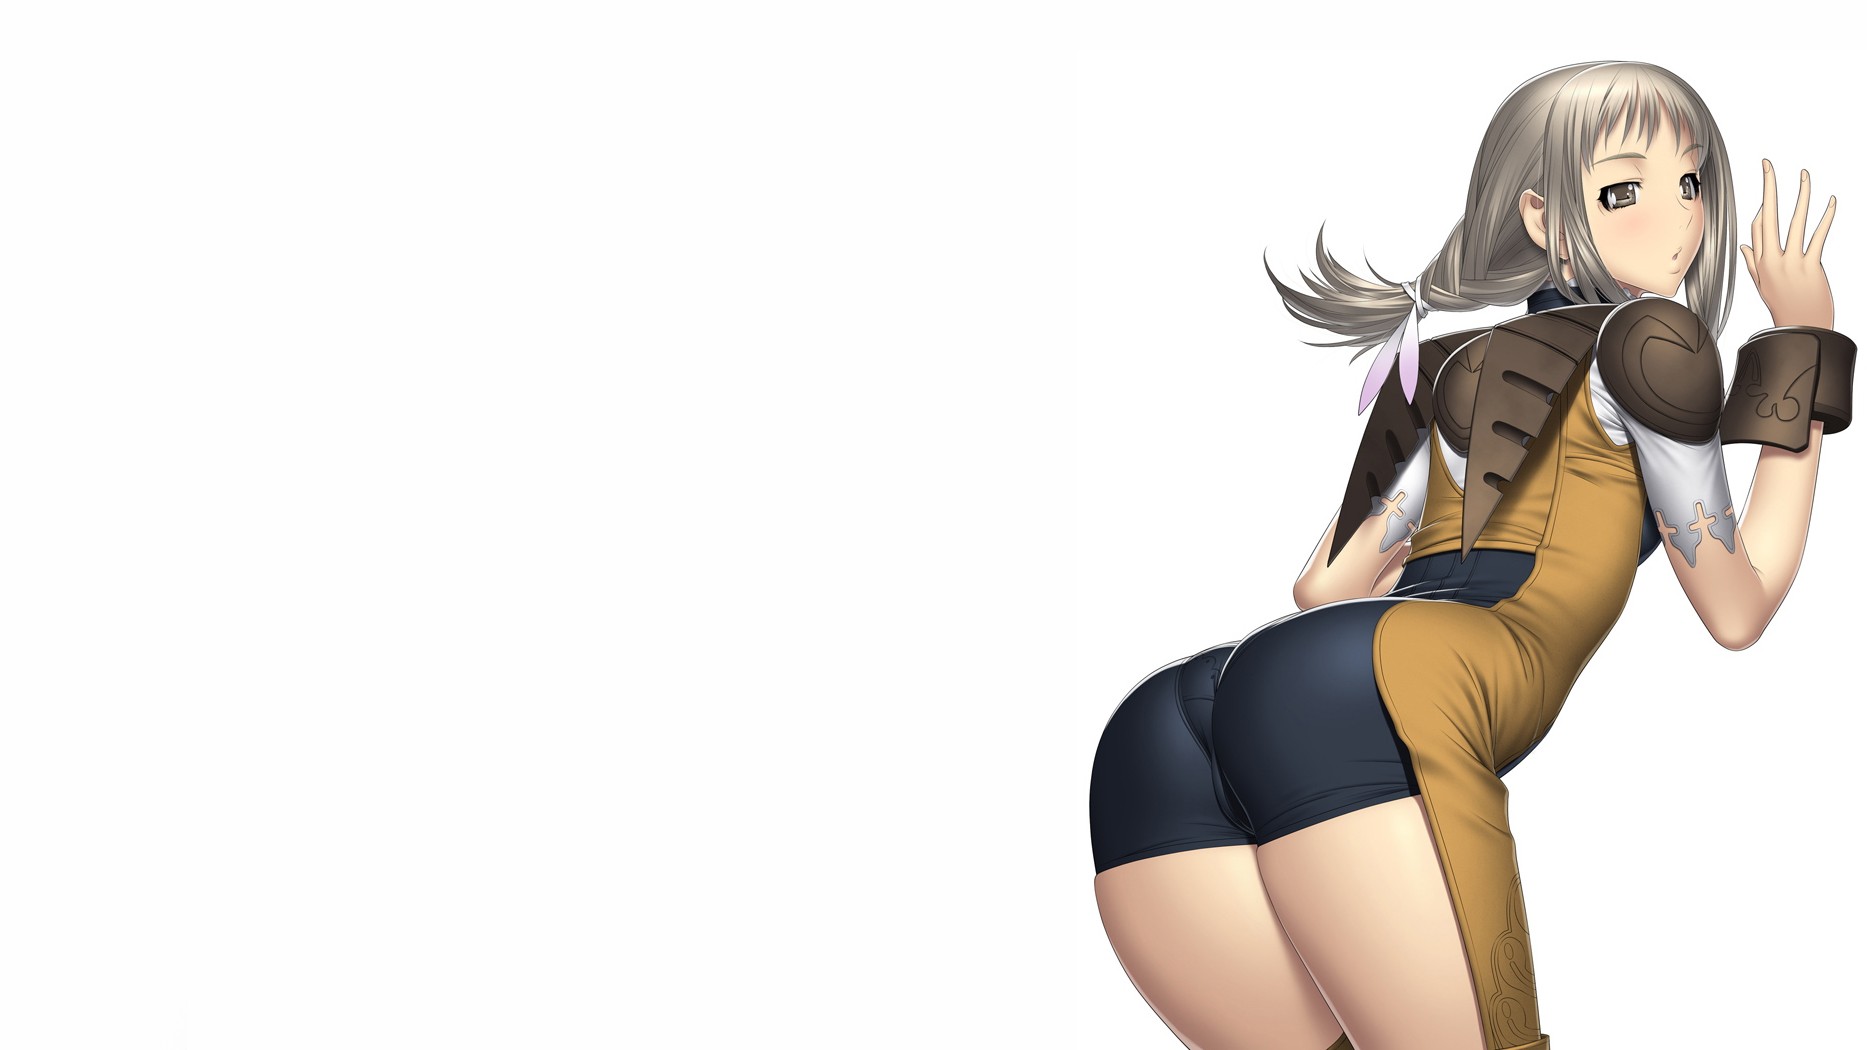 Anime 1867x1050 Final Fantasy XII Final Fantasy tight clothing suggestive ass simple background white background video games video game art video game girls ash blonde dark eyes women Penelo (Final Fantasy XII) bent over